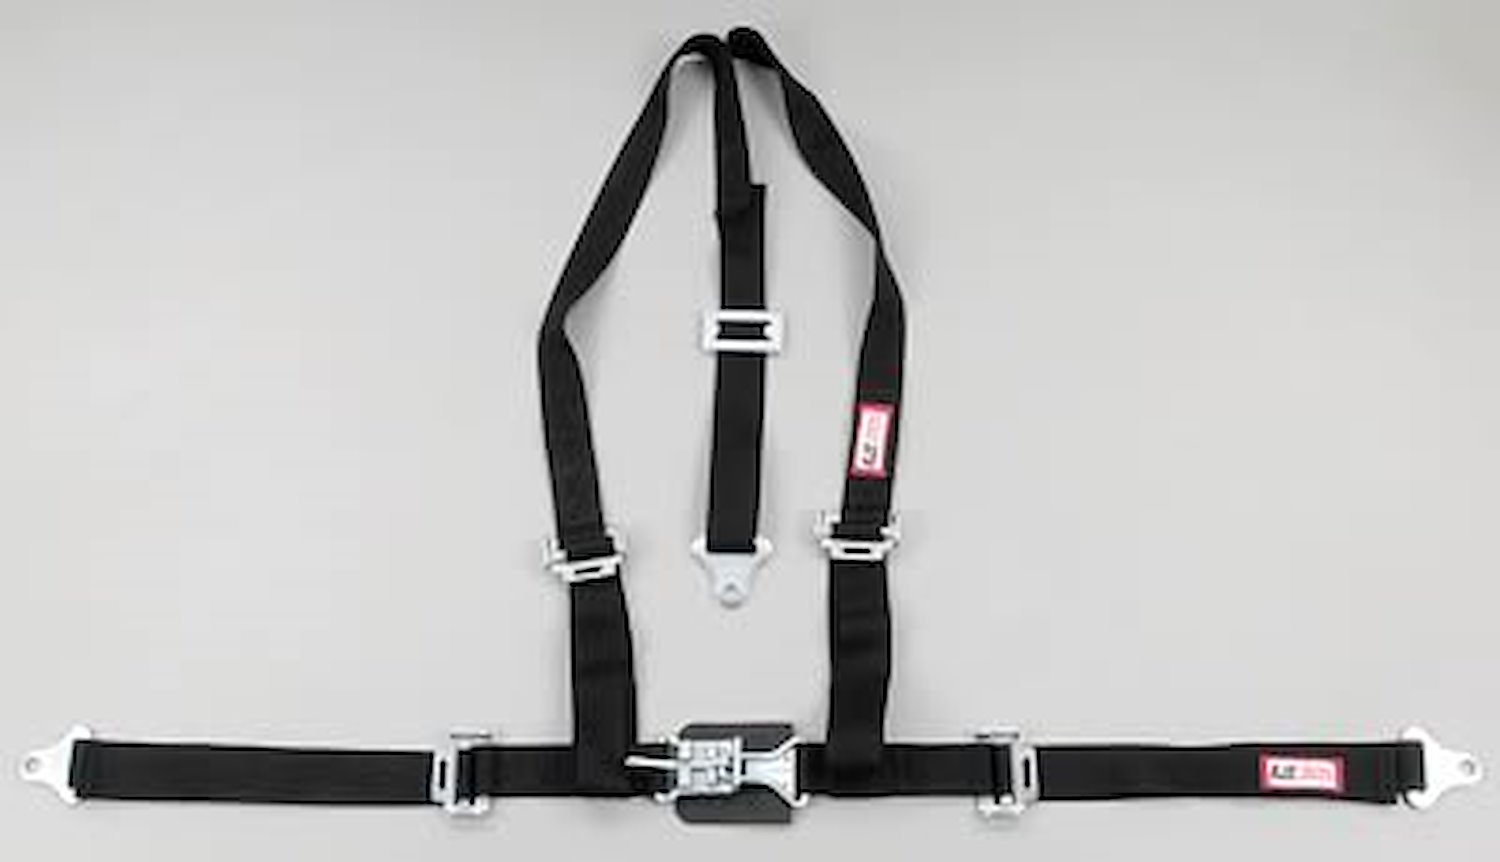 NON-SFI L&L HARNESS 3 PULL UP Lap BELT SNAP SEWN IN 2 S.H. Y FLOOR Mount WRAP/SNAP BLACK